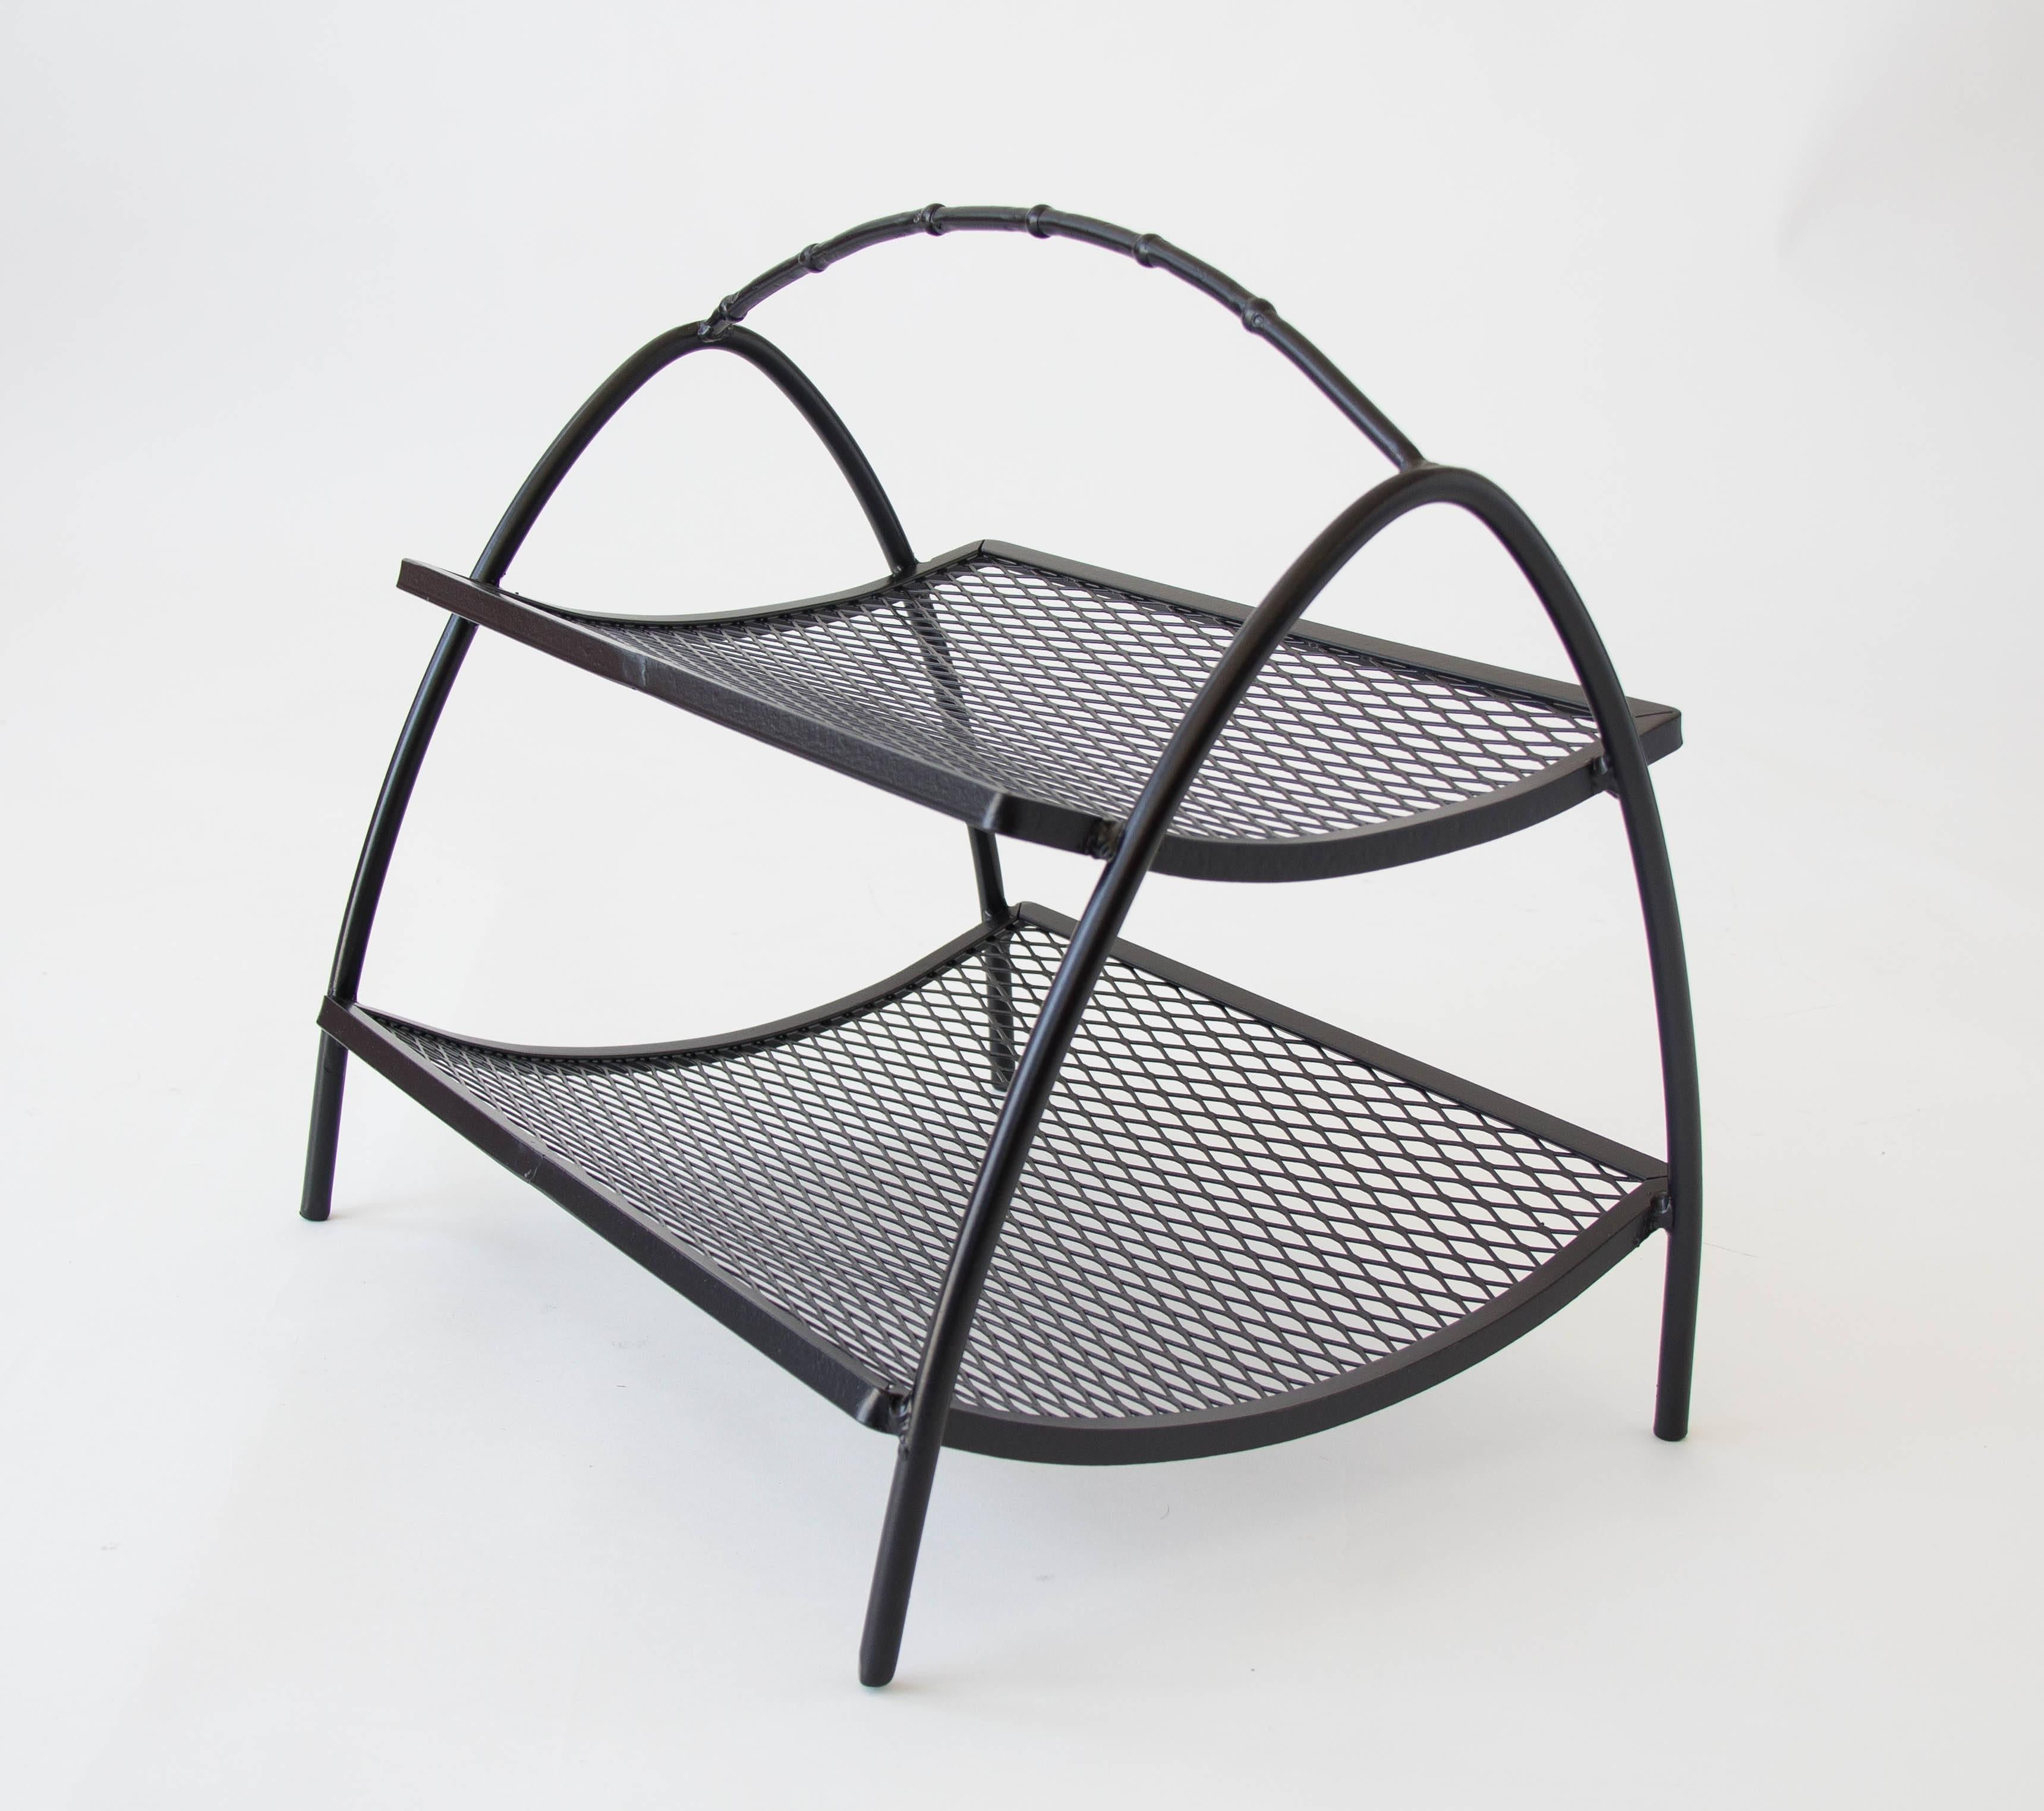 A simple wire magazine rack with two shelves of wire mesh. The shelves fit into a frame of two arched wires, joined by a central handle of faux-bamboo. 

Condition: Excellent restored condition; professionally powder-coated. 

Dimensions: 18